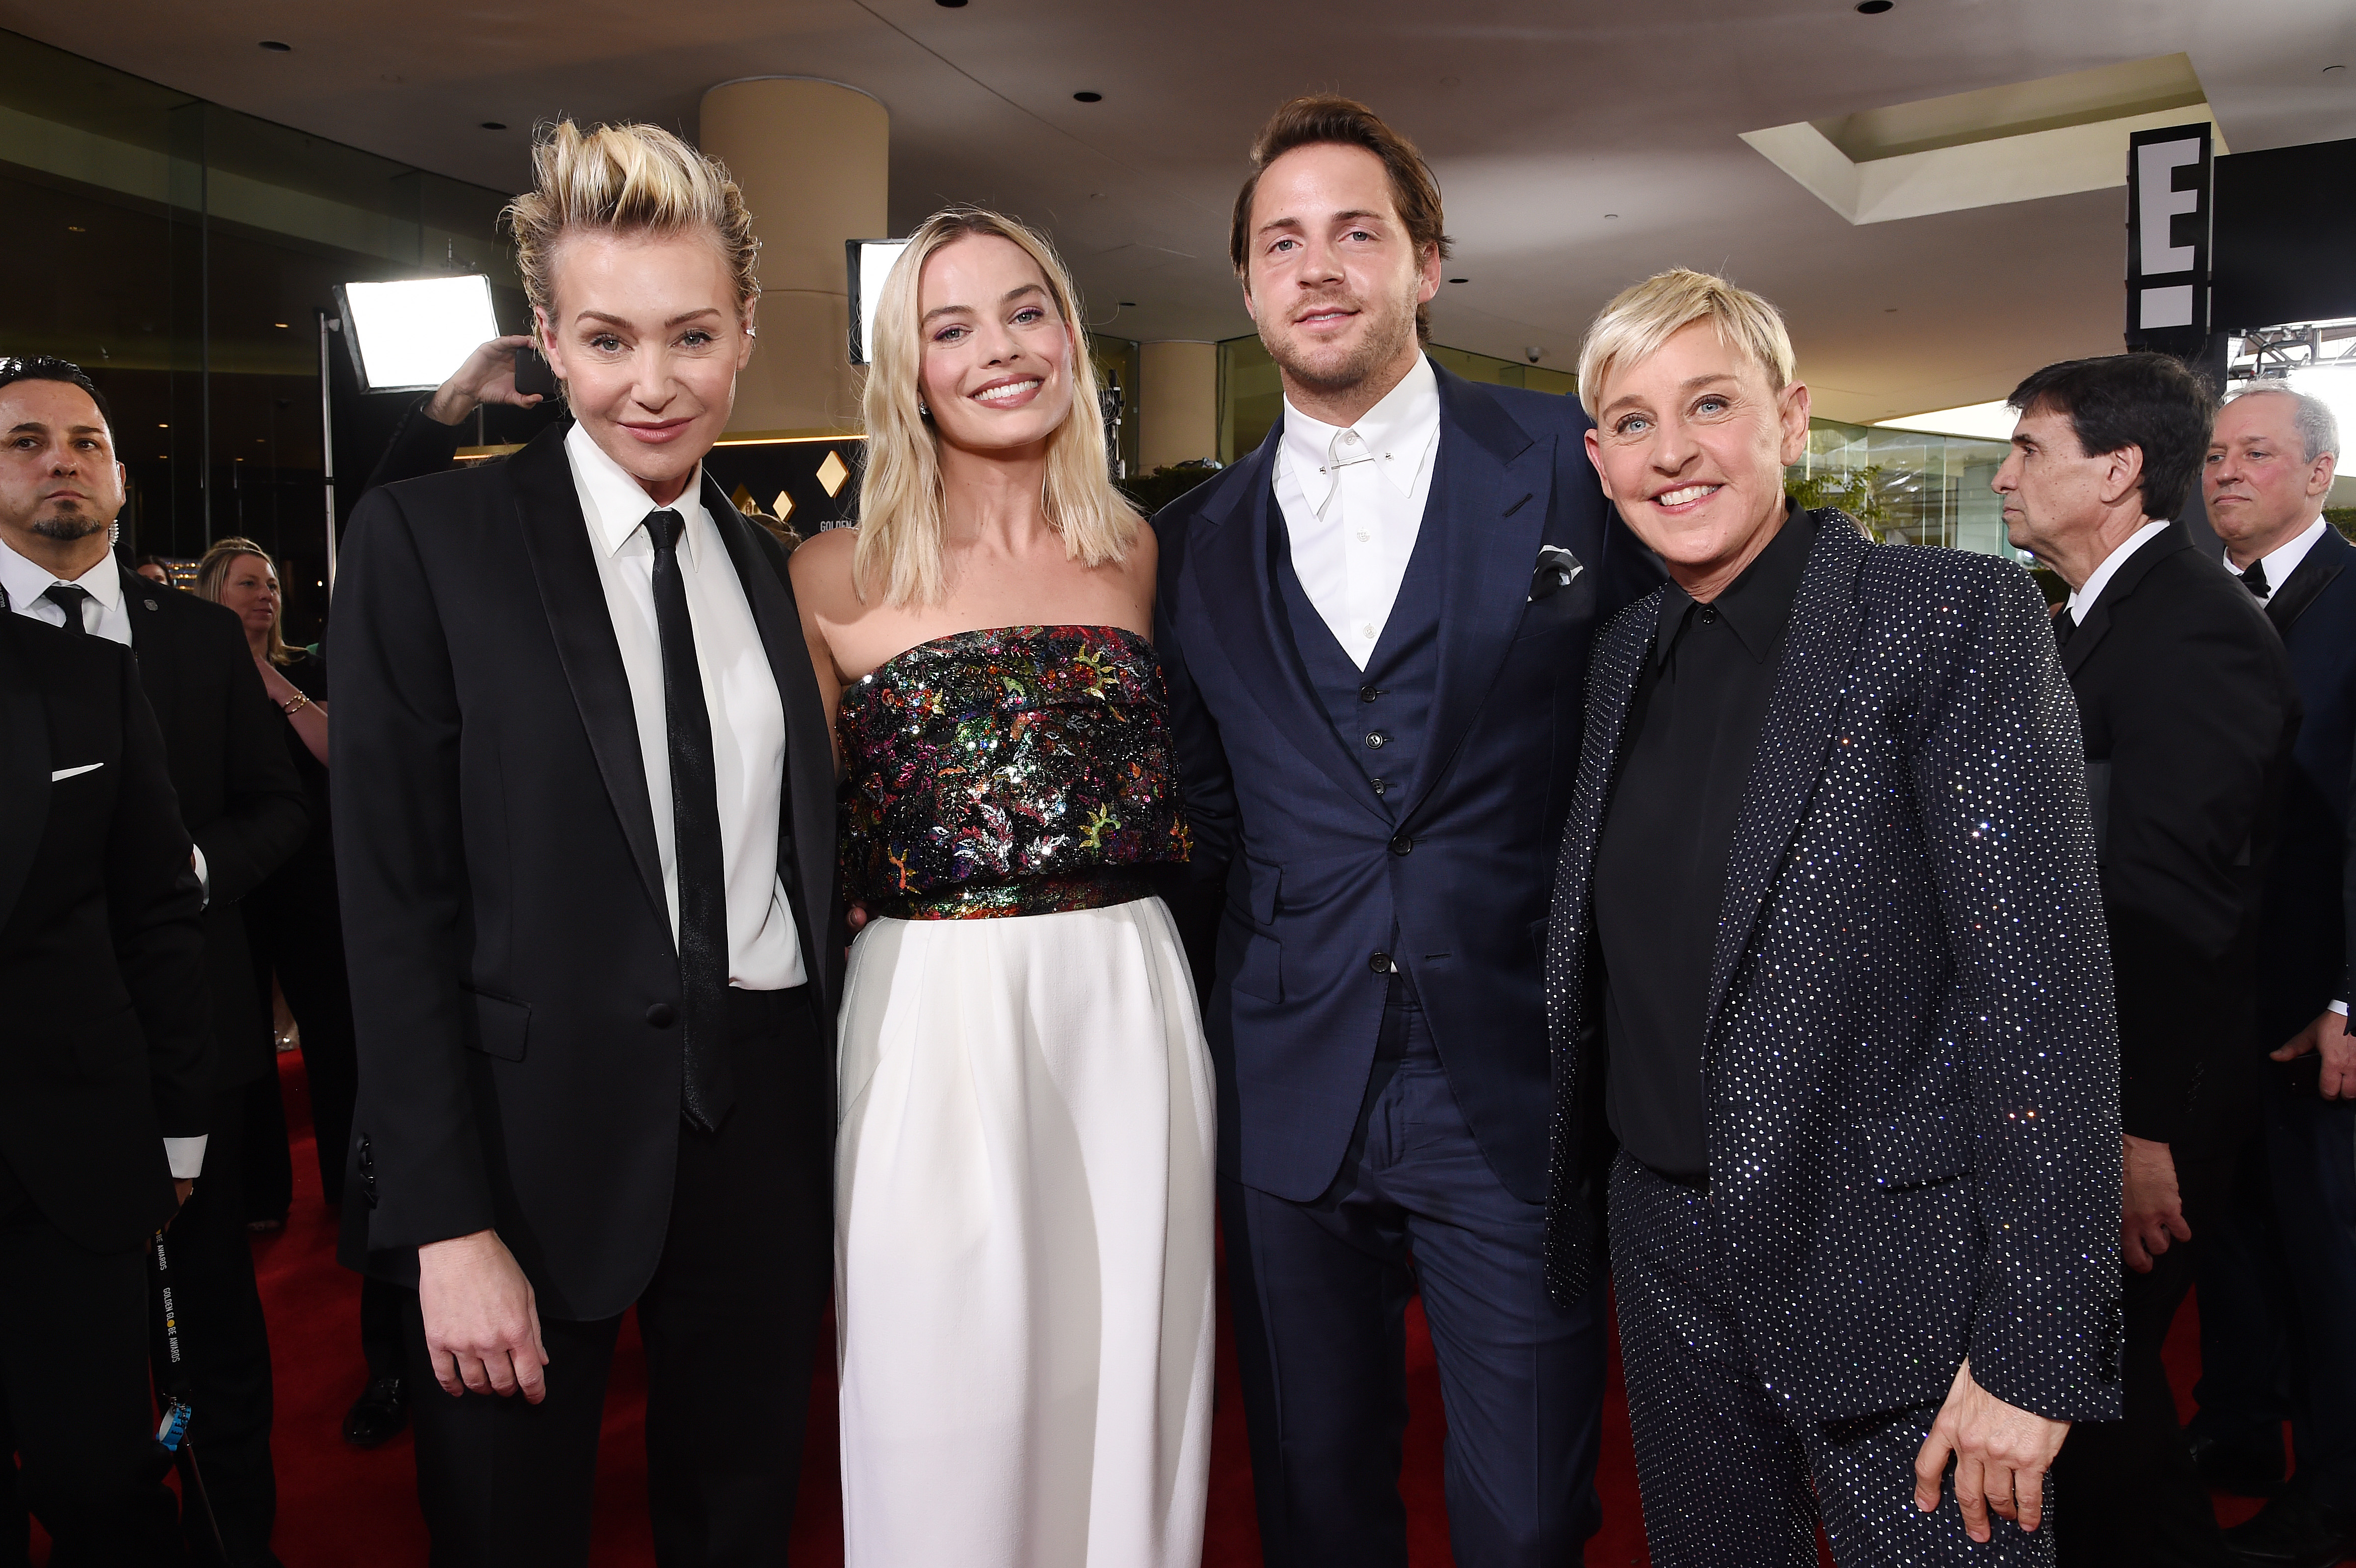 Portia de Rossi, Margot Robbie, Tom Ackerley, and Ellen DeGeneres at the 77th Annual Golden Globe Awards in Beverly Hills, California on January 05, 2020 | Source: Getty Images